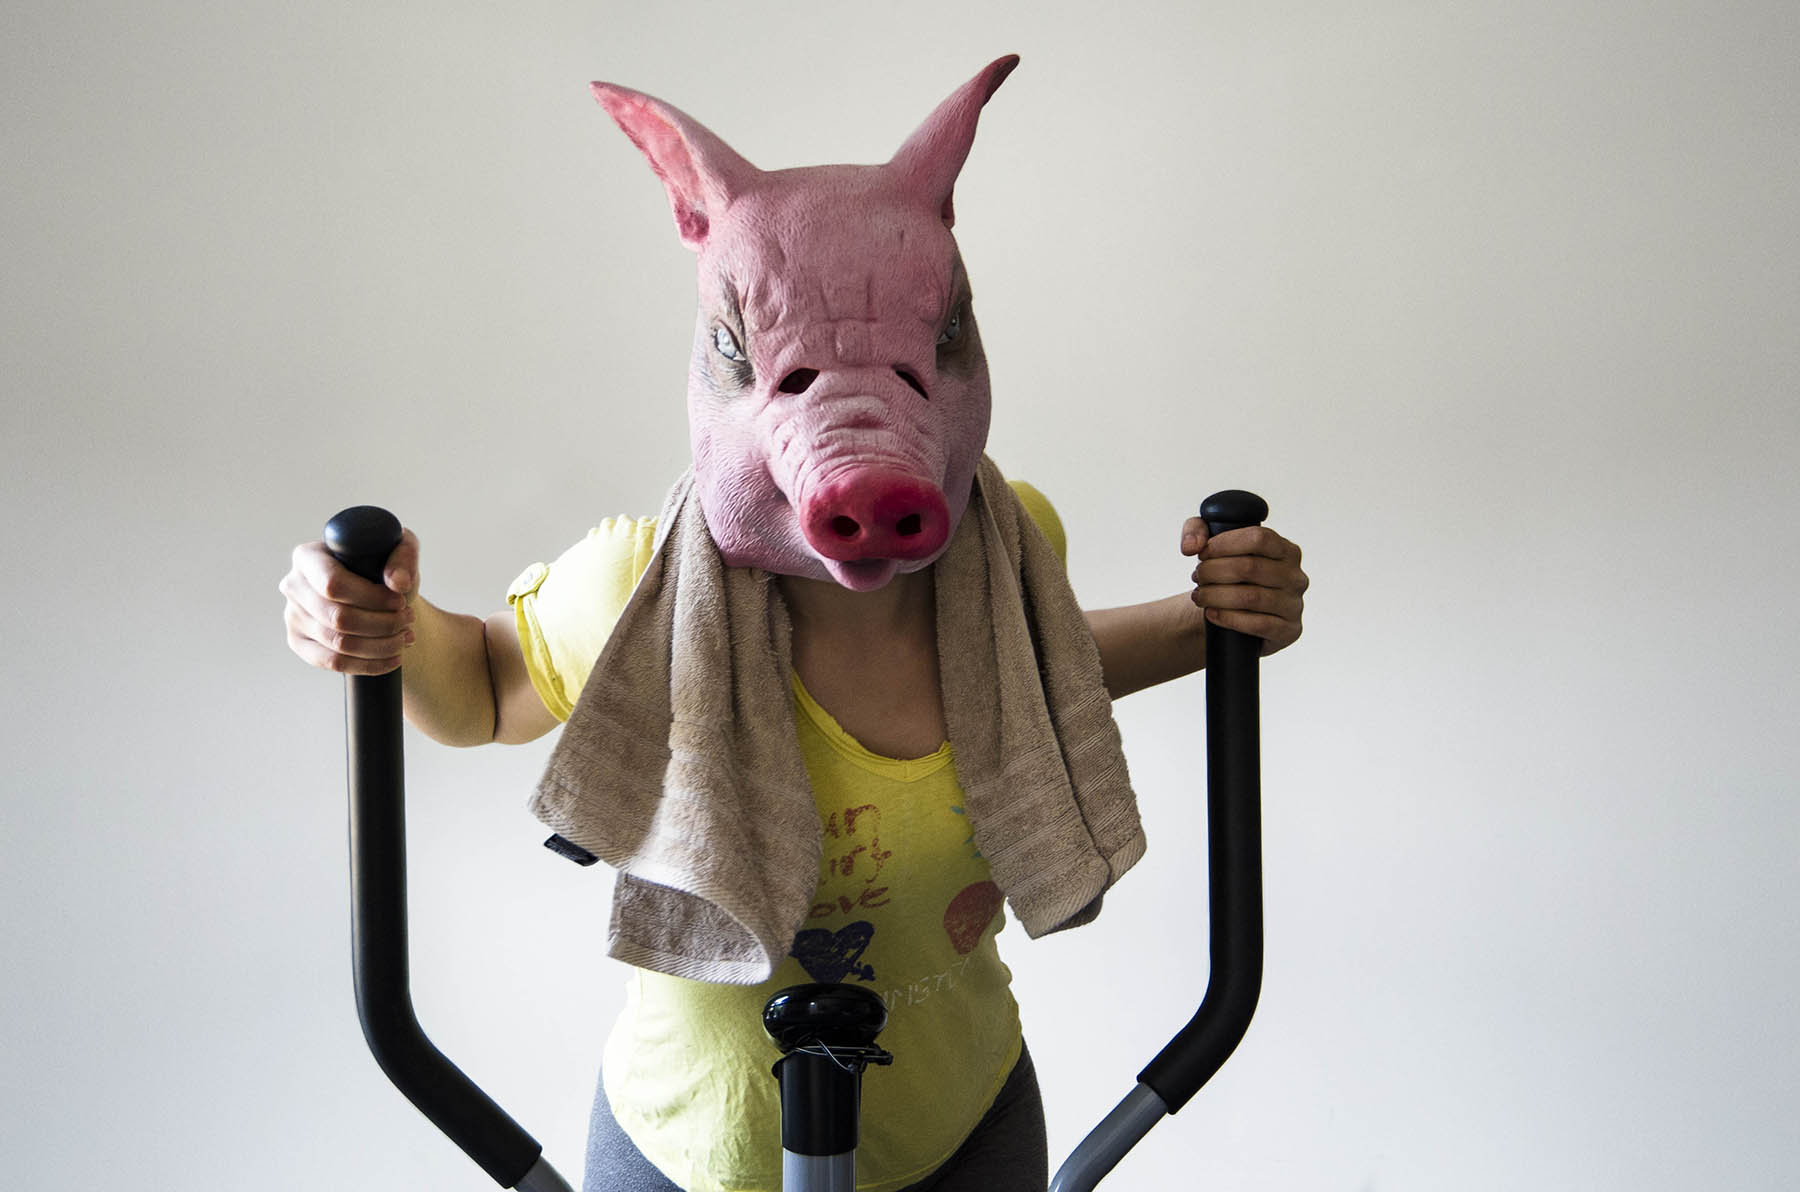 Beast - person wearing pig mask on cross trainer